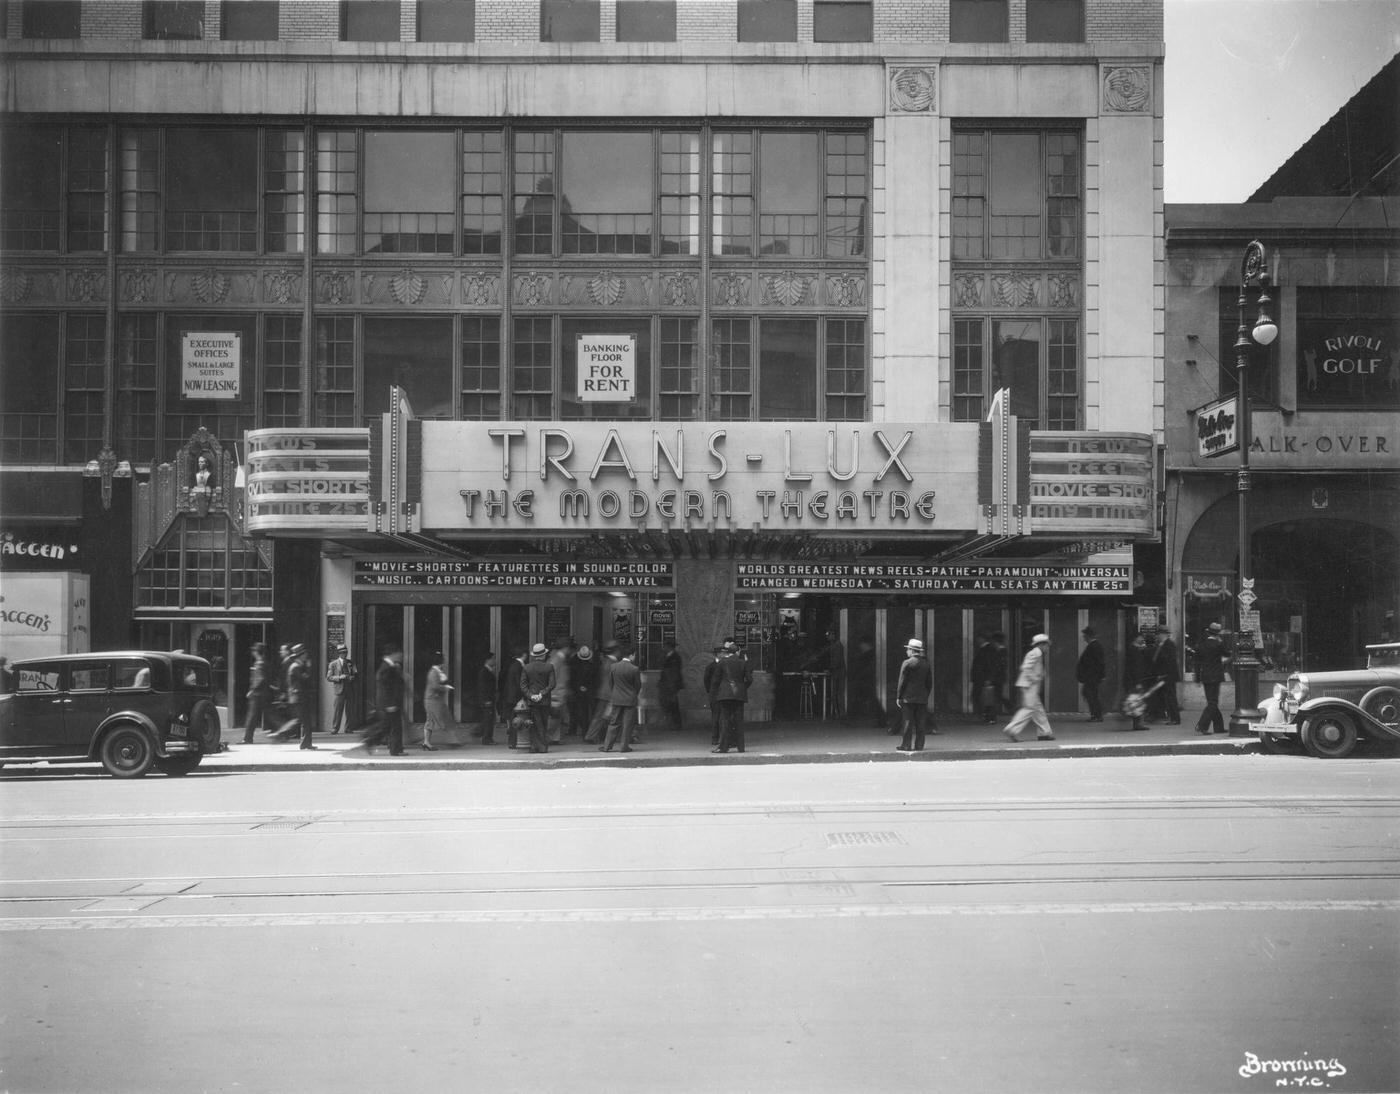 Trans-Lux Theatre, Broadway Between 49Th And 50Th Streets, New York City, 1929.